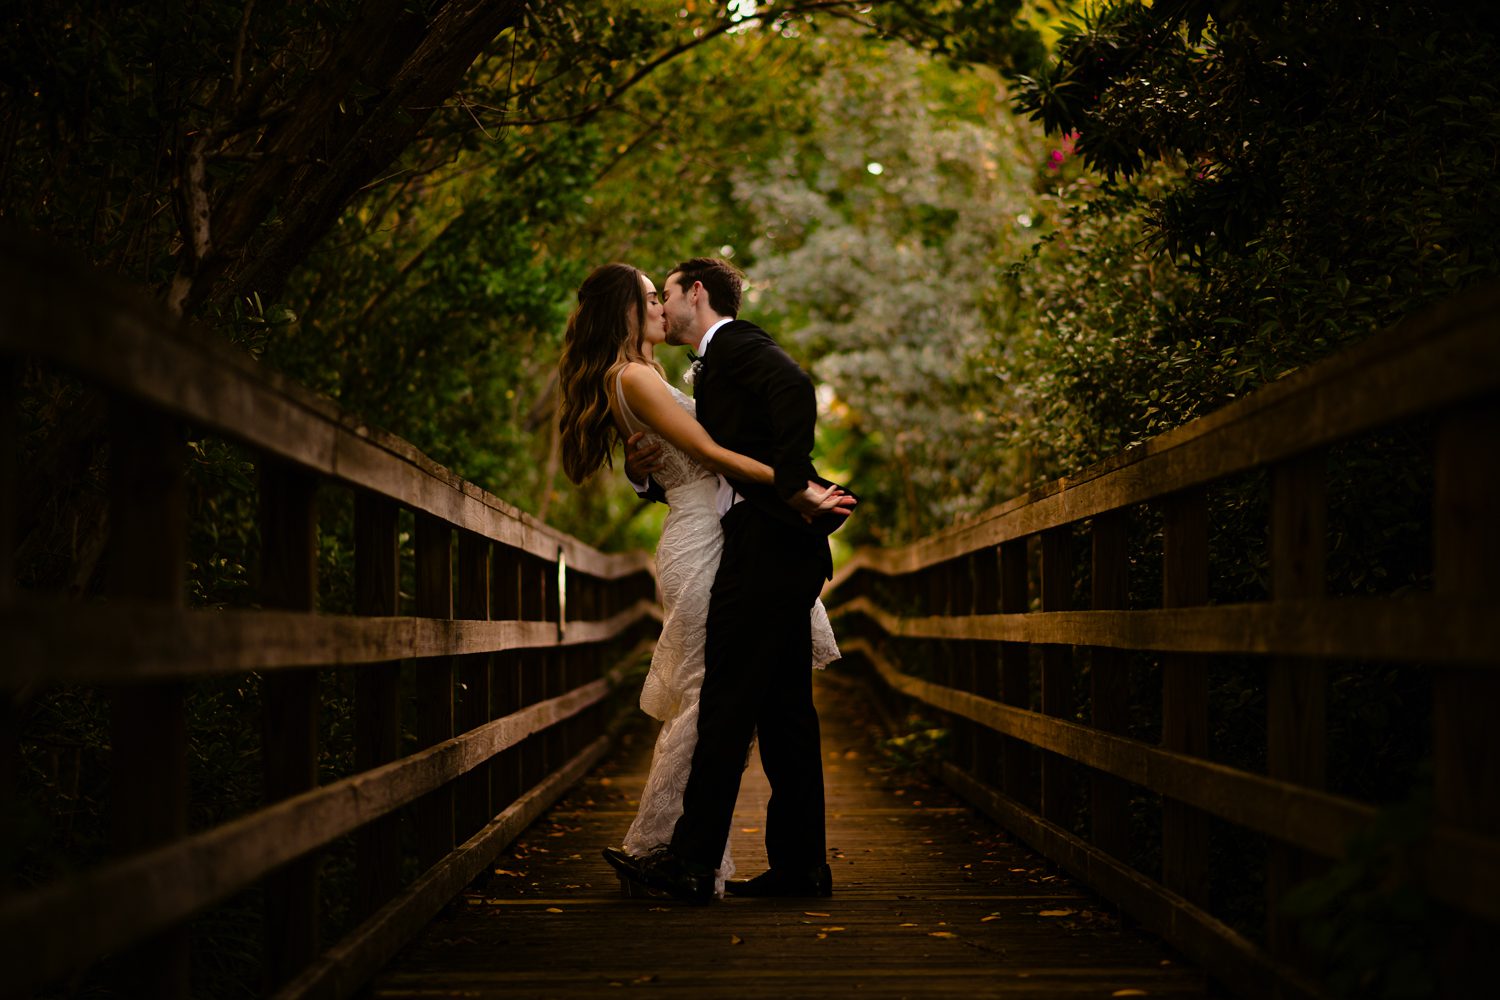 Shana and Patrick kiss on a bridge in the woods during their Hemingway House Wedding.